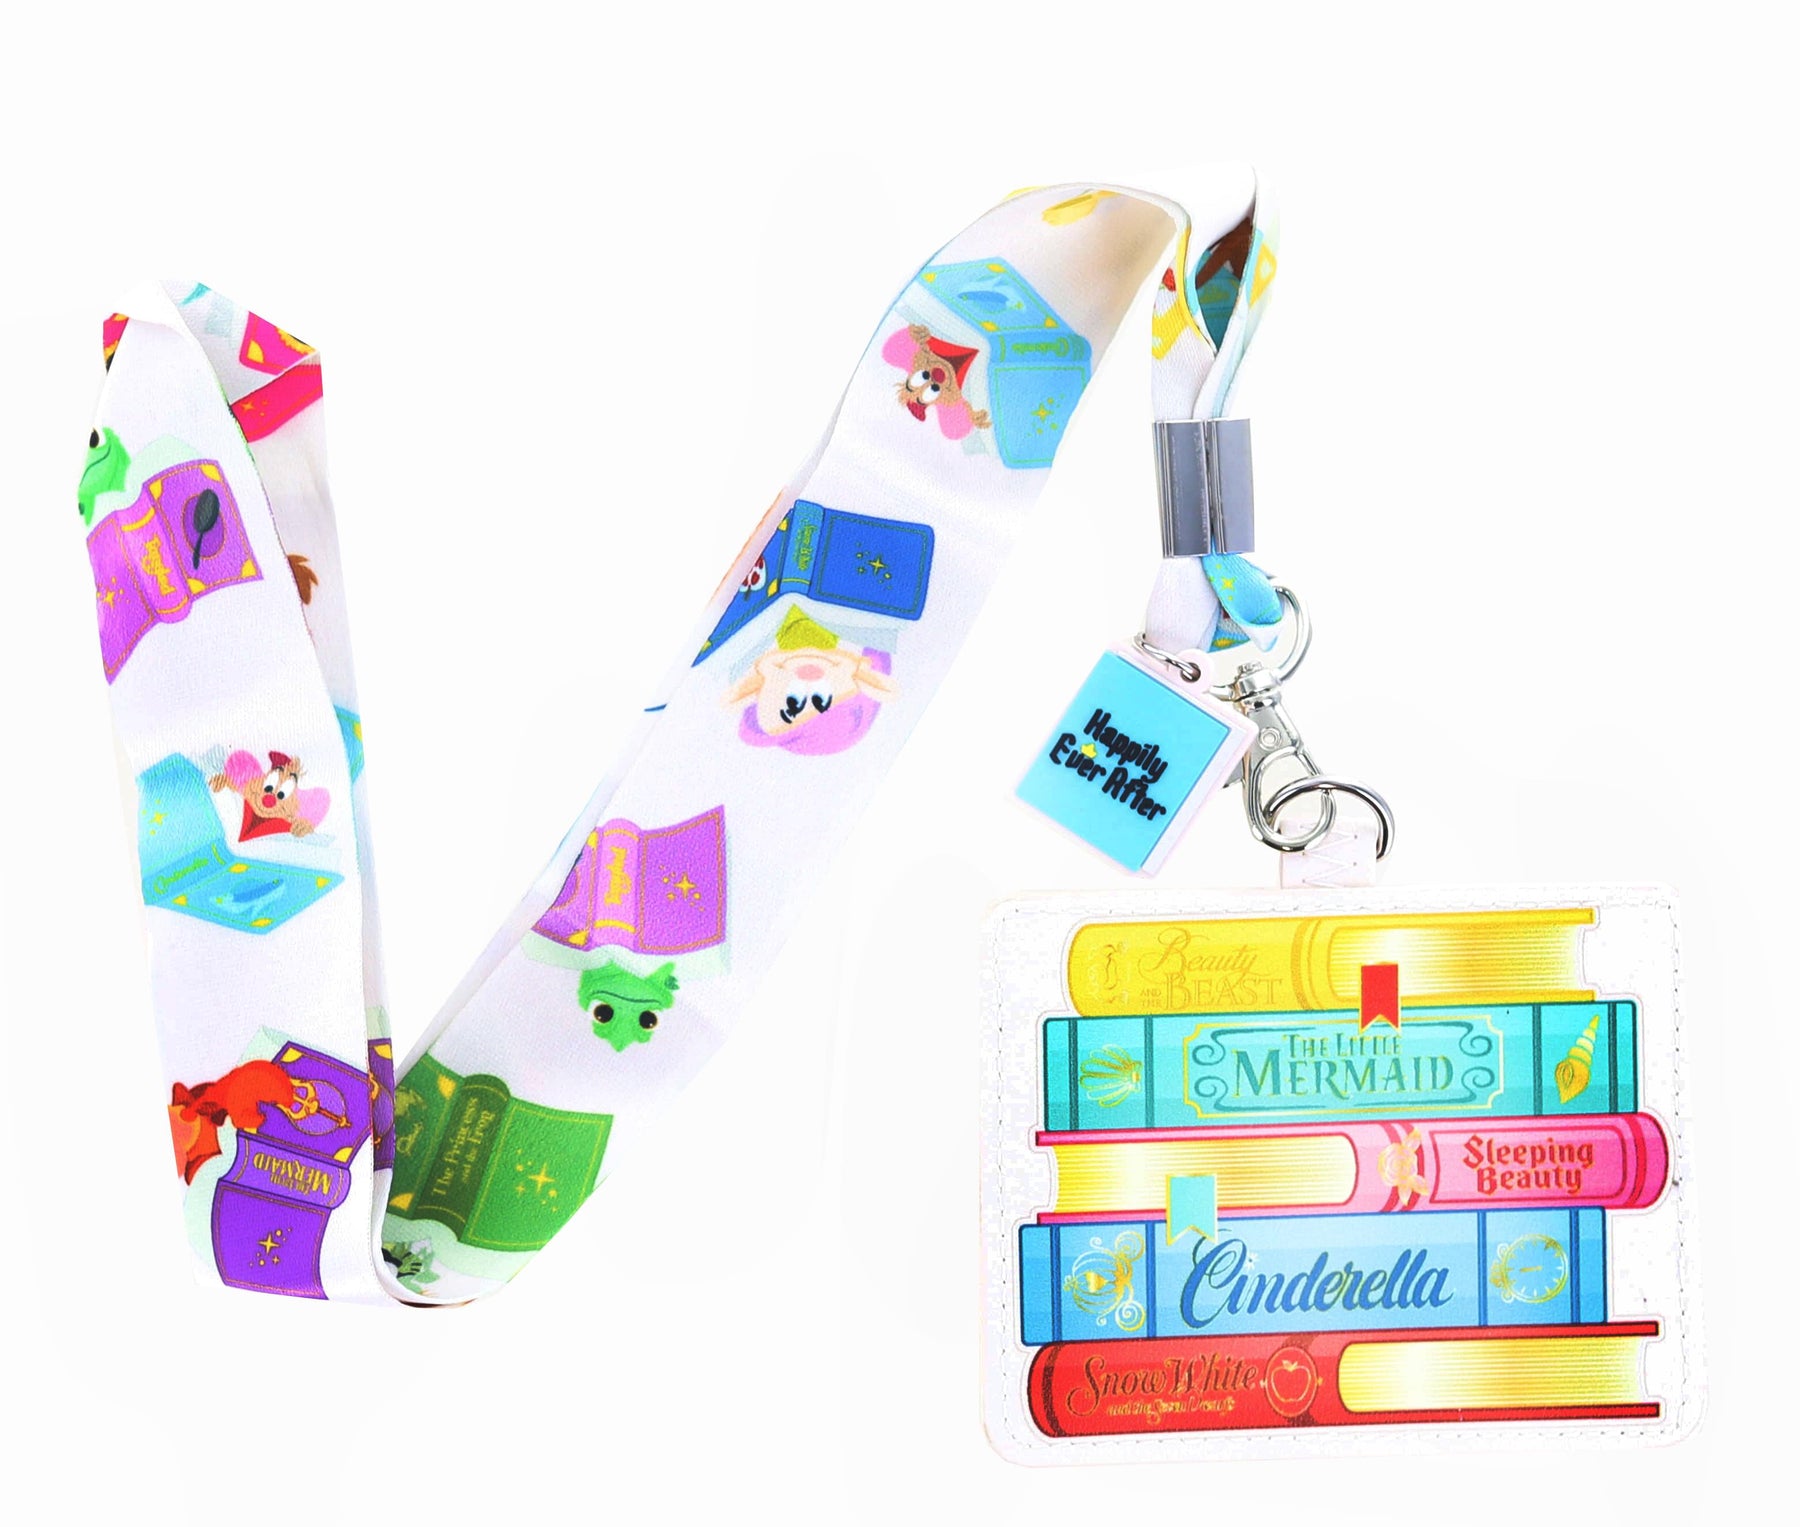 Disney Princess Books Lanyard with Cardholder and Charm